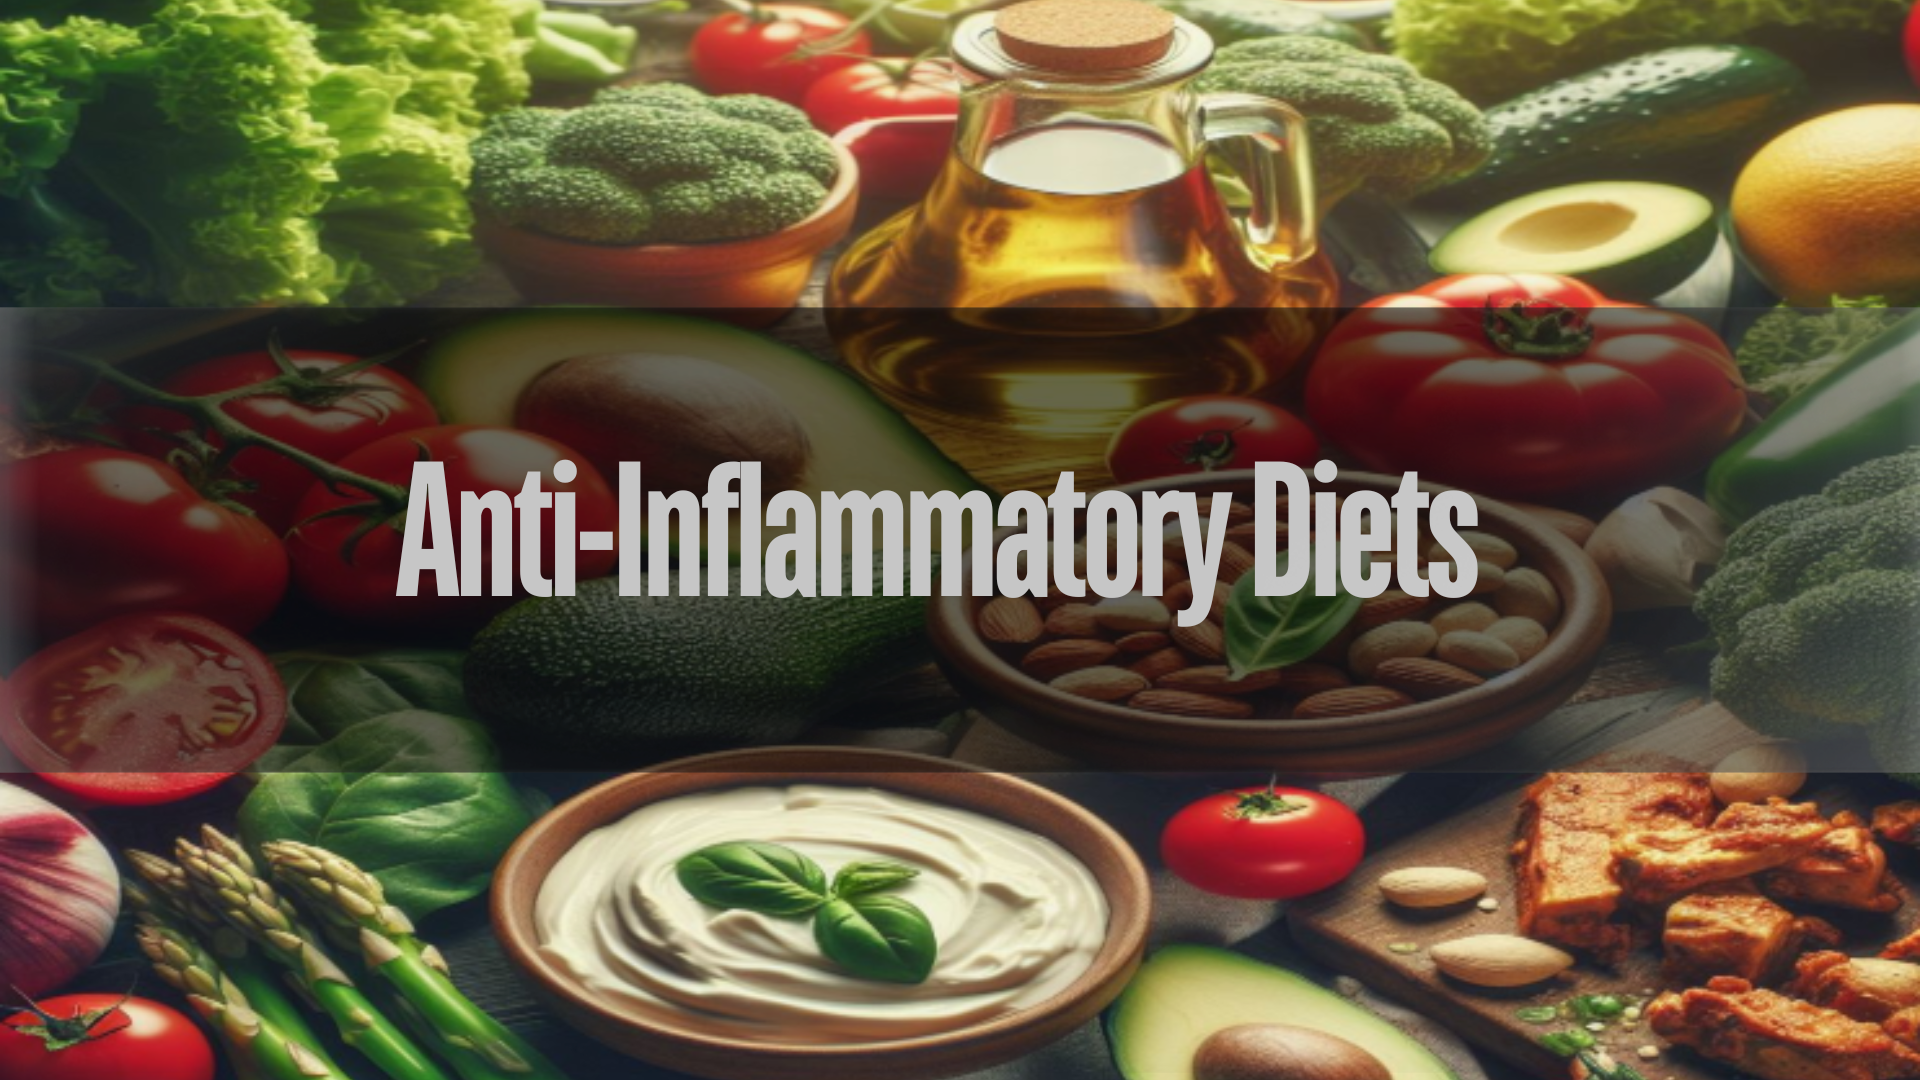 Learn about anti-inflammatory diets and how they can help reduce inflammation in the body, potentially preventing chronic diseases.